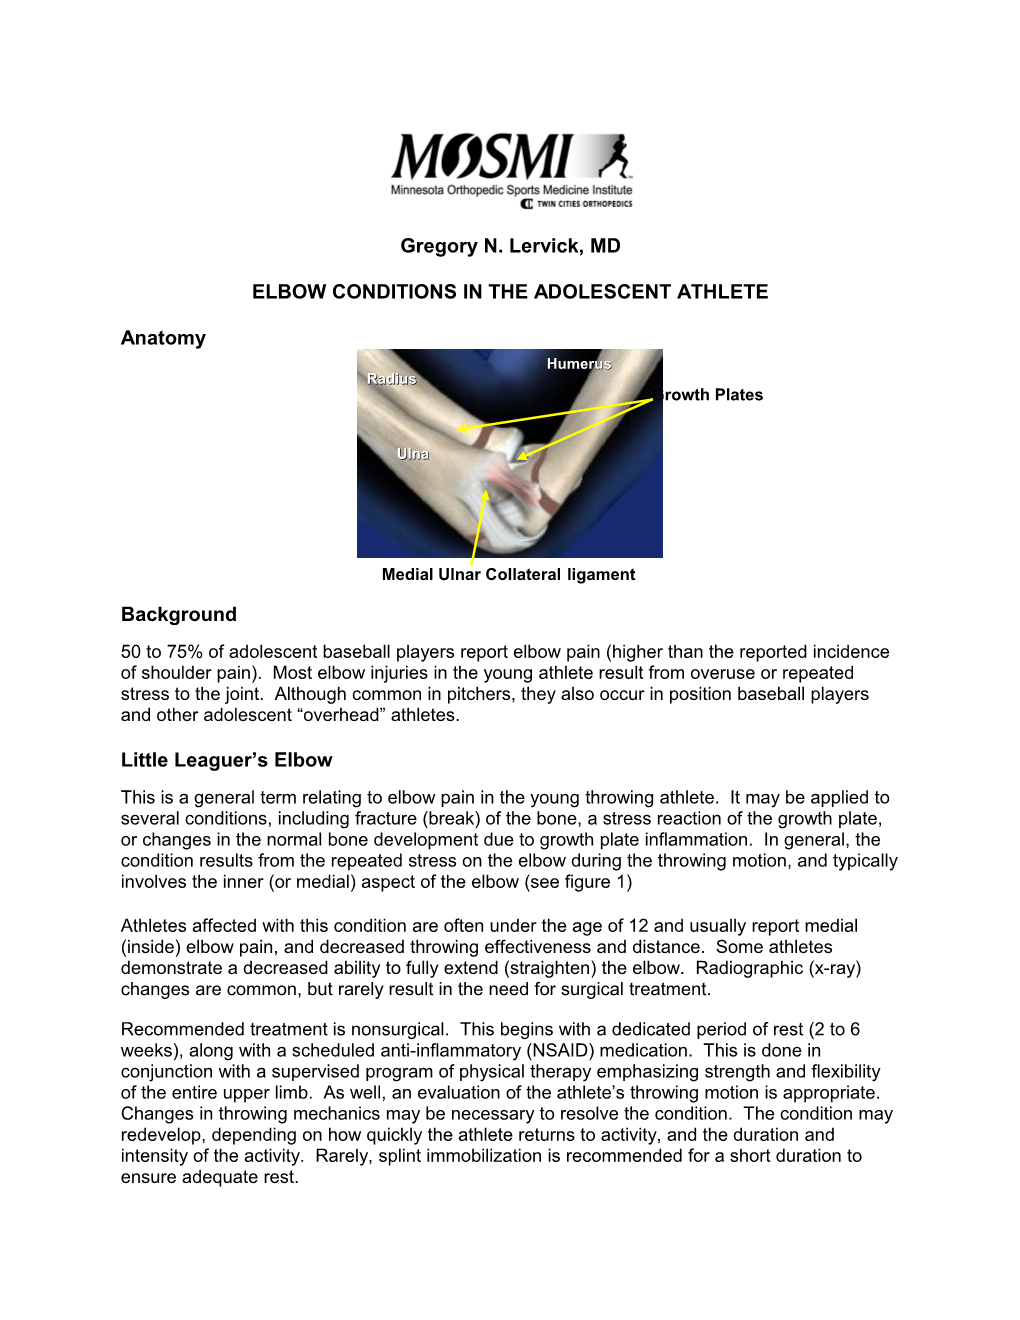 Elbow Conditions in the Adolescent Athlete